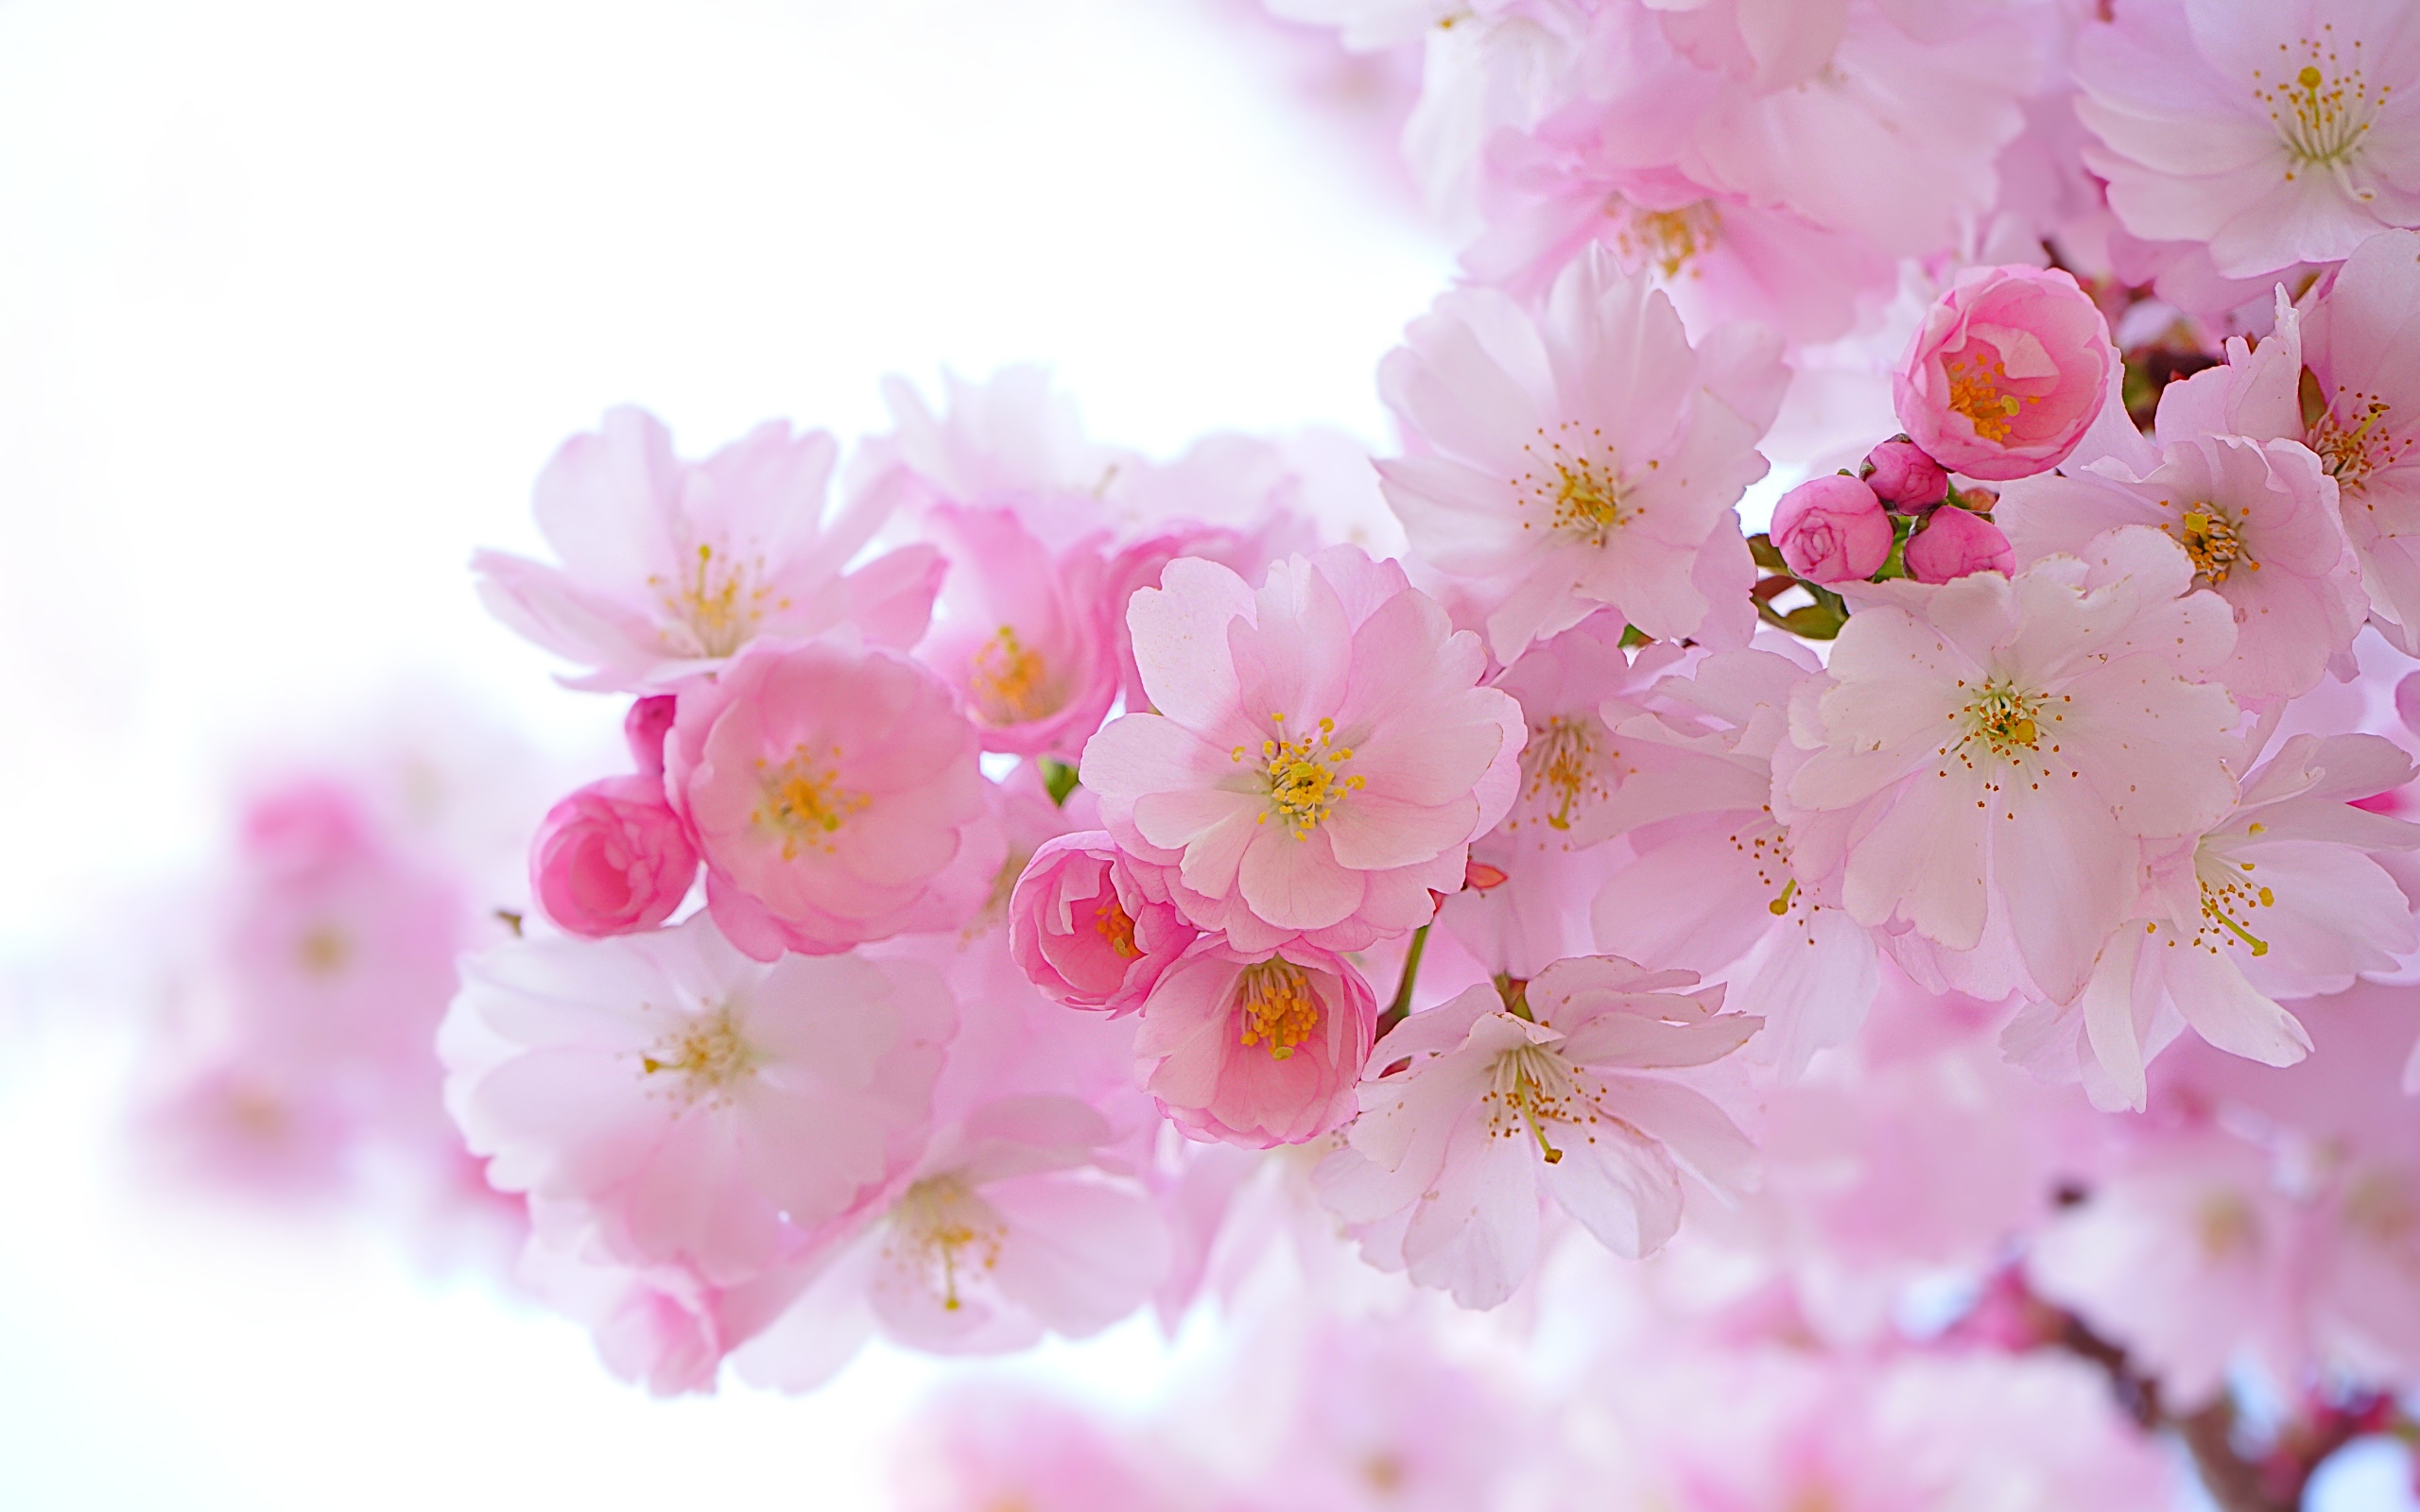 Small pink flowers on a white background